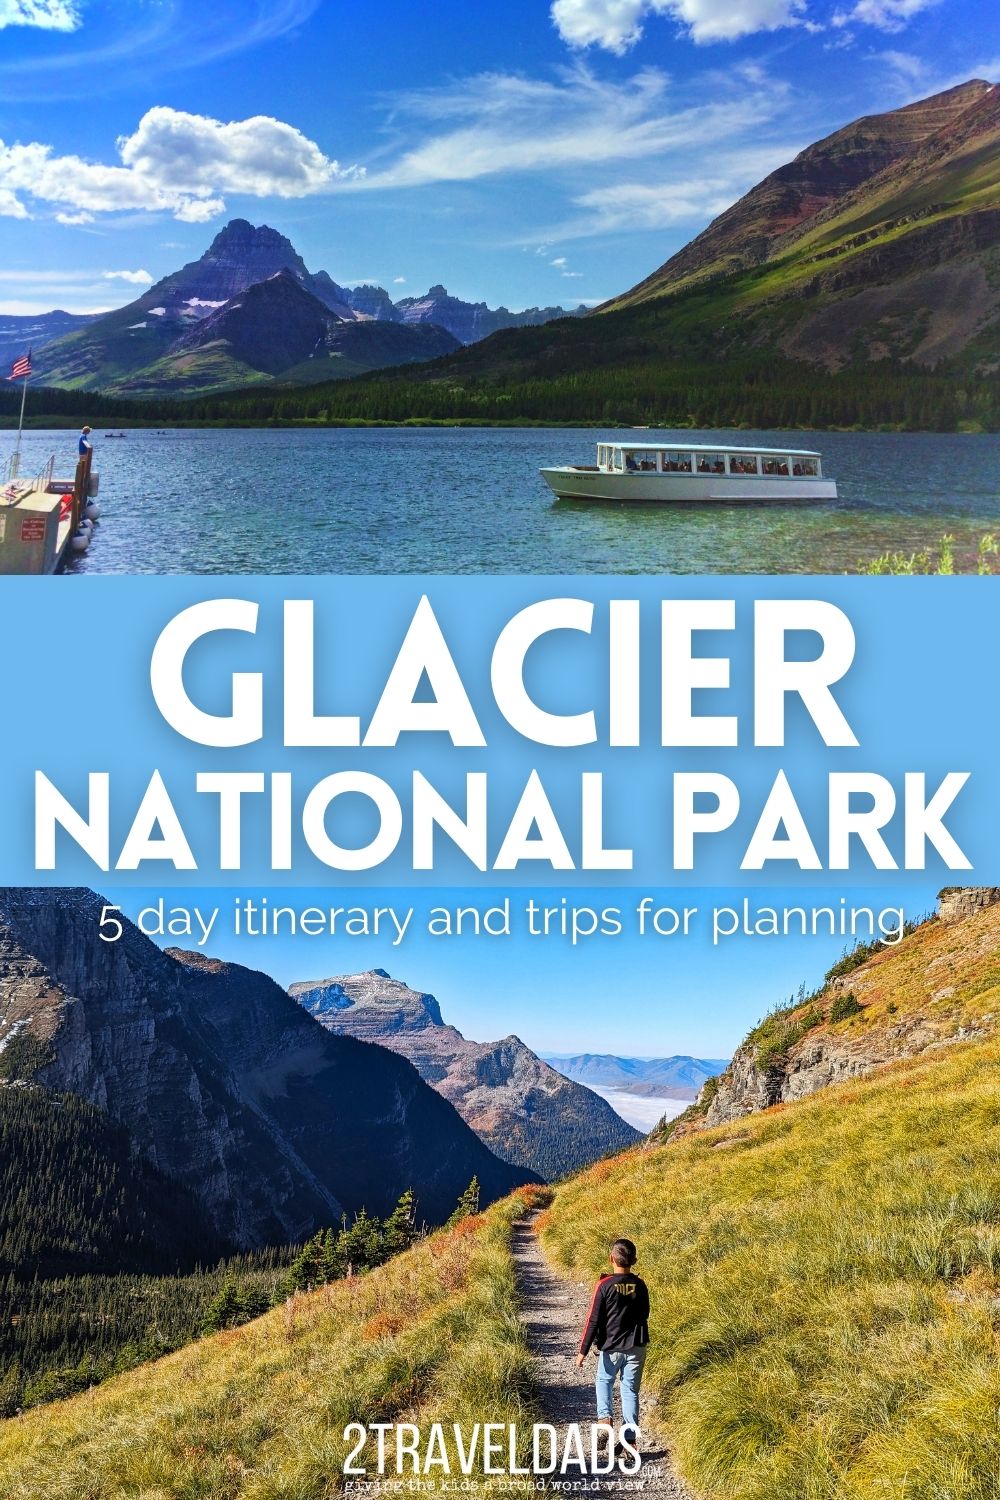 This Glacier National Park itinerary is perfect for spending 5-7 days exploring Montana's best park. From hikes all around Glacier to where to stay, this itinerary is a great plan for summer.